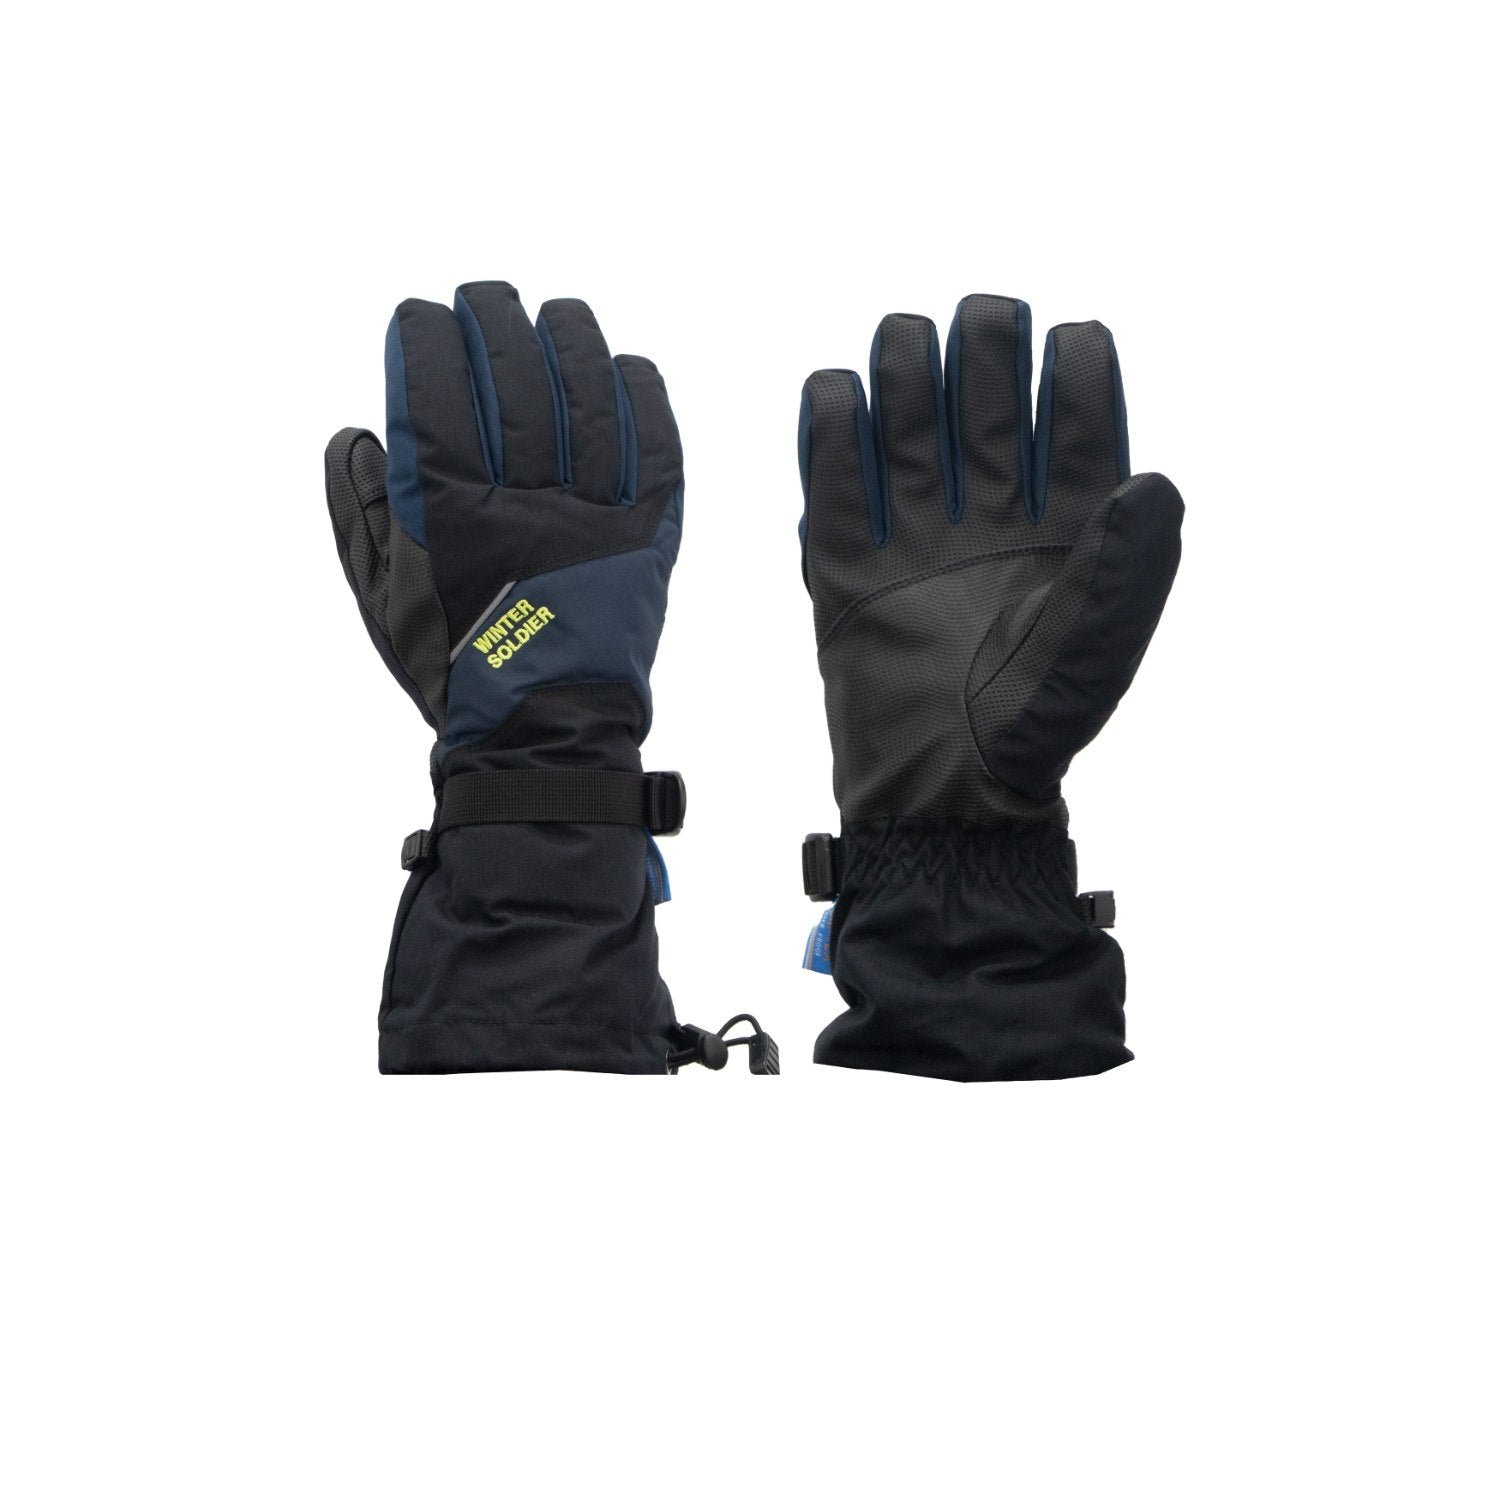 Buy Gokyo K2 Extreme Cold Weather Gloves | Cold Weather Gloves at Gokyo Outdoor Clothing & Gear